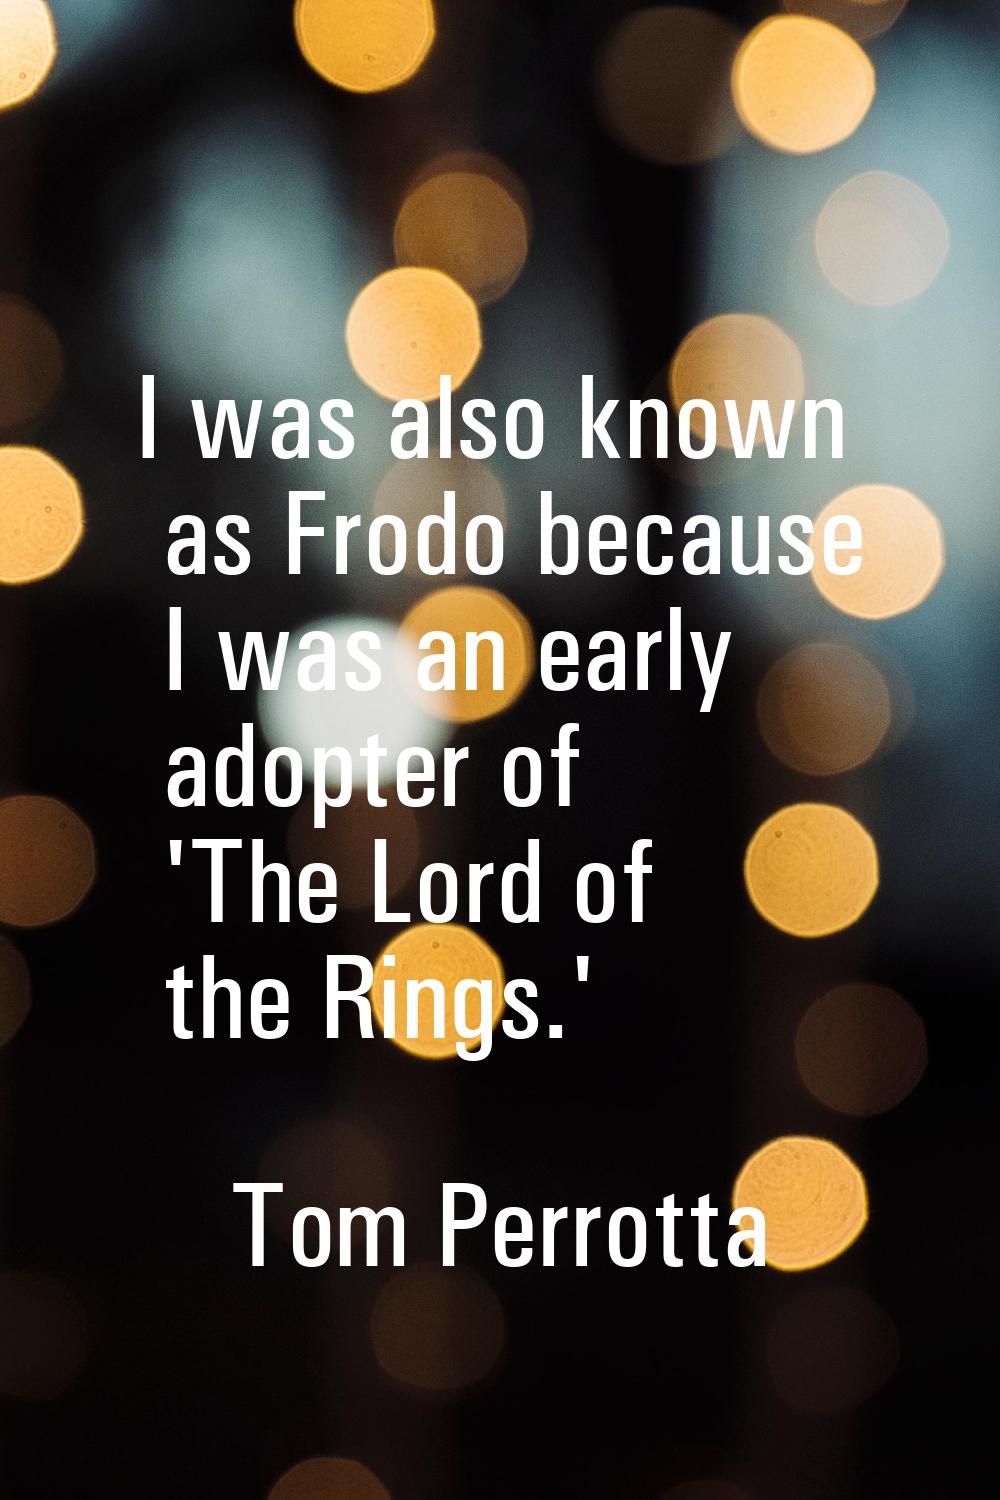 I was also known as Frodo because I was an early adopter of 'The Lord of the Rings.'